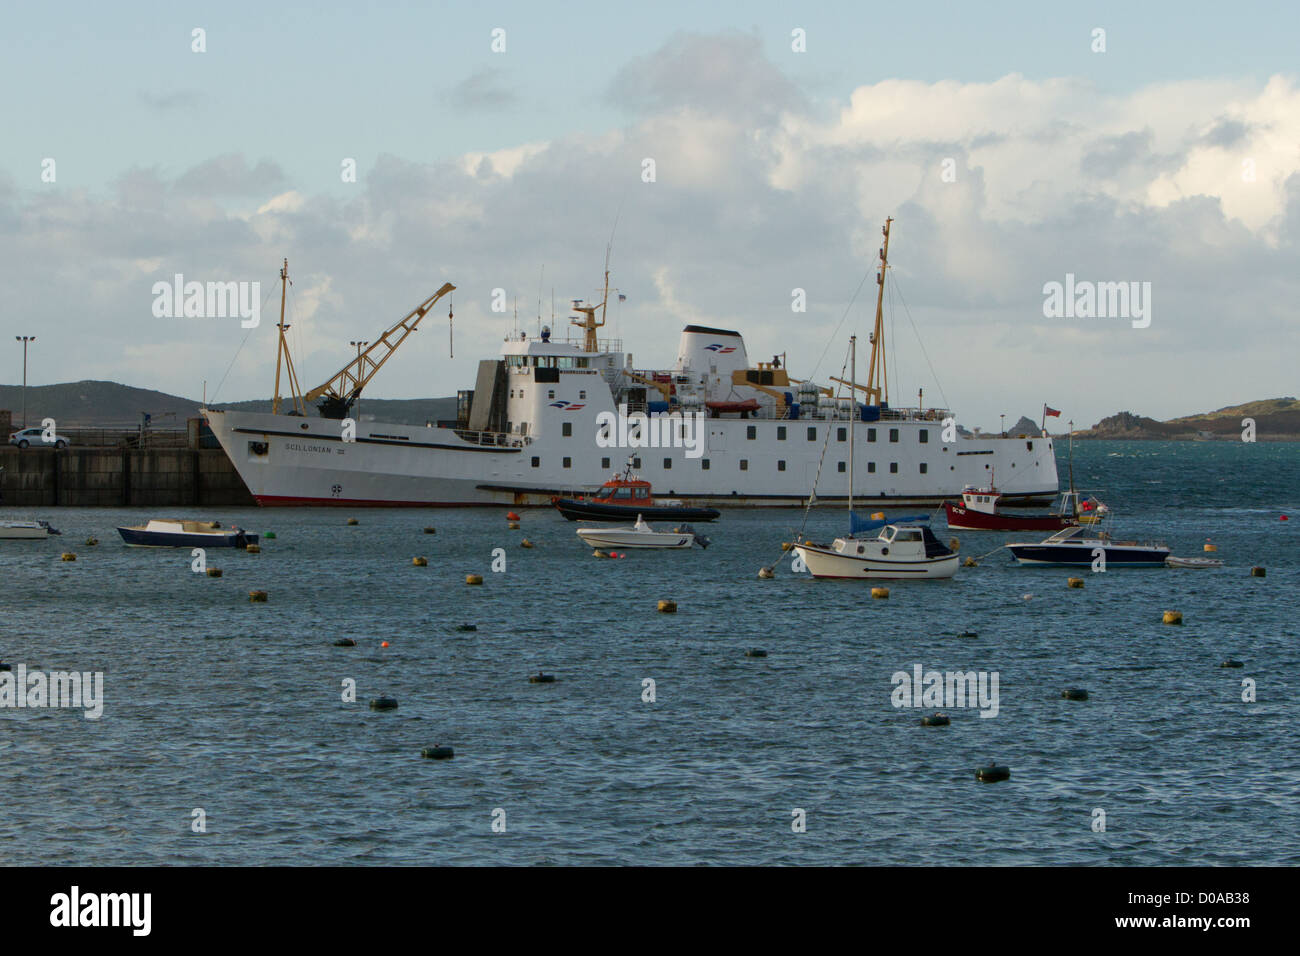 Scillonian III amarré à St Mary's Harbour, Isles of Scilly Banque D'Images